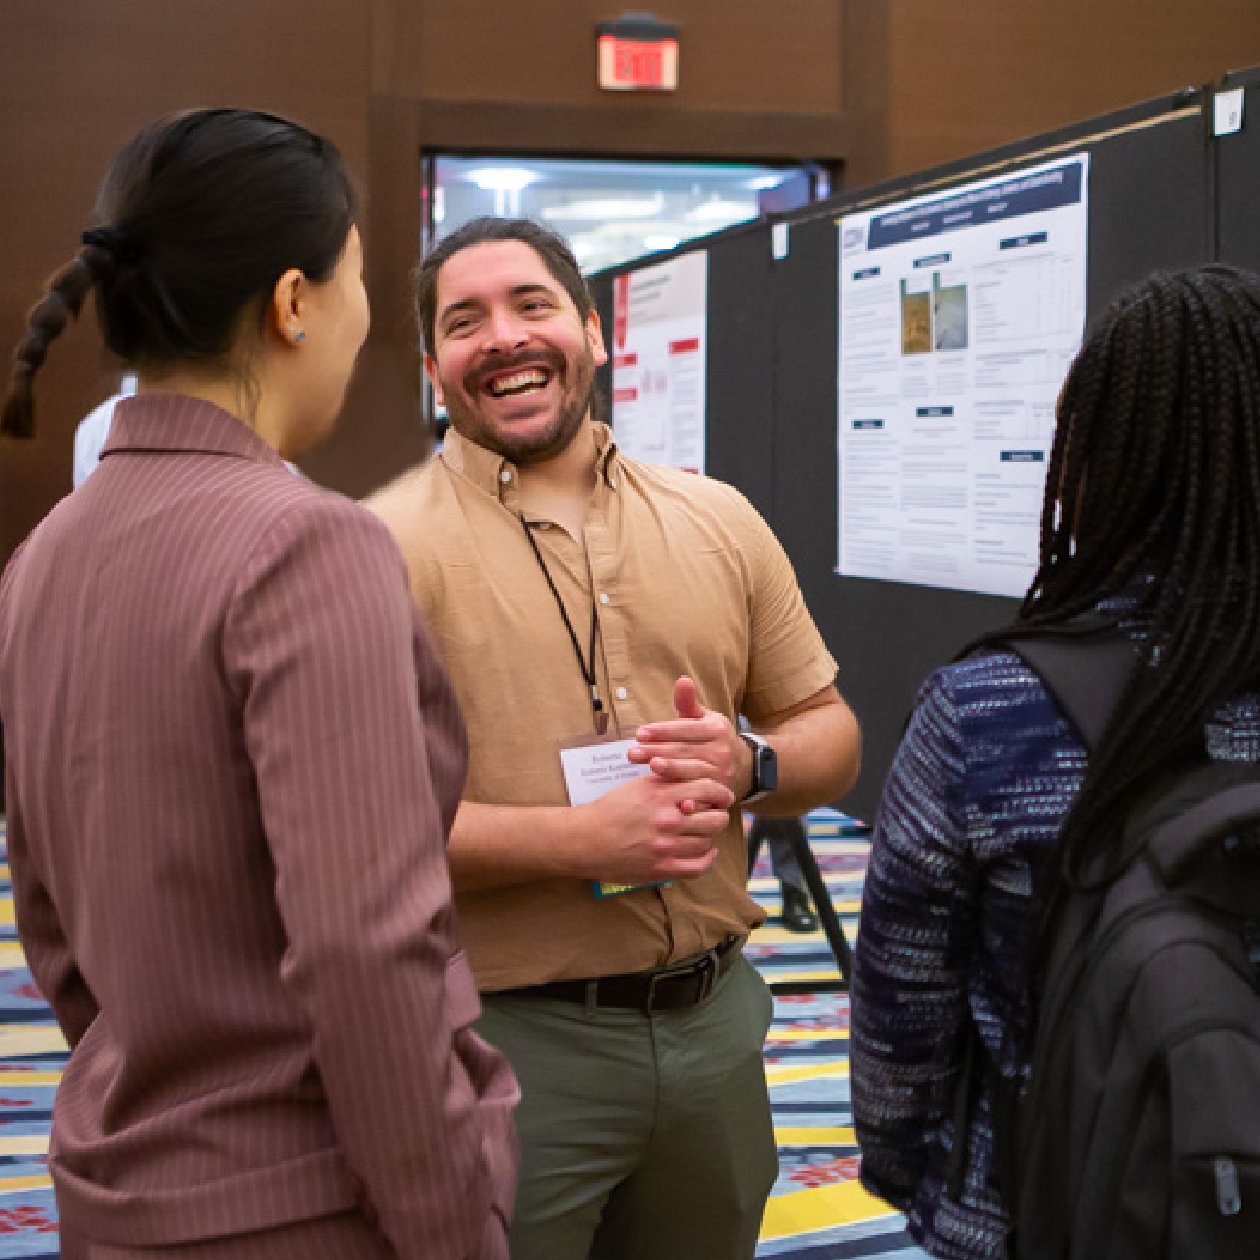 Graduate students stand discussing research in front of posters at a conference